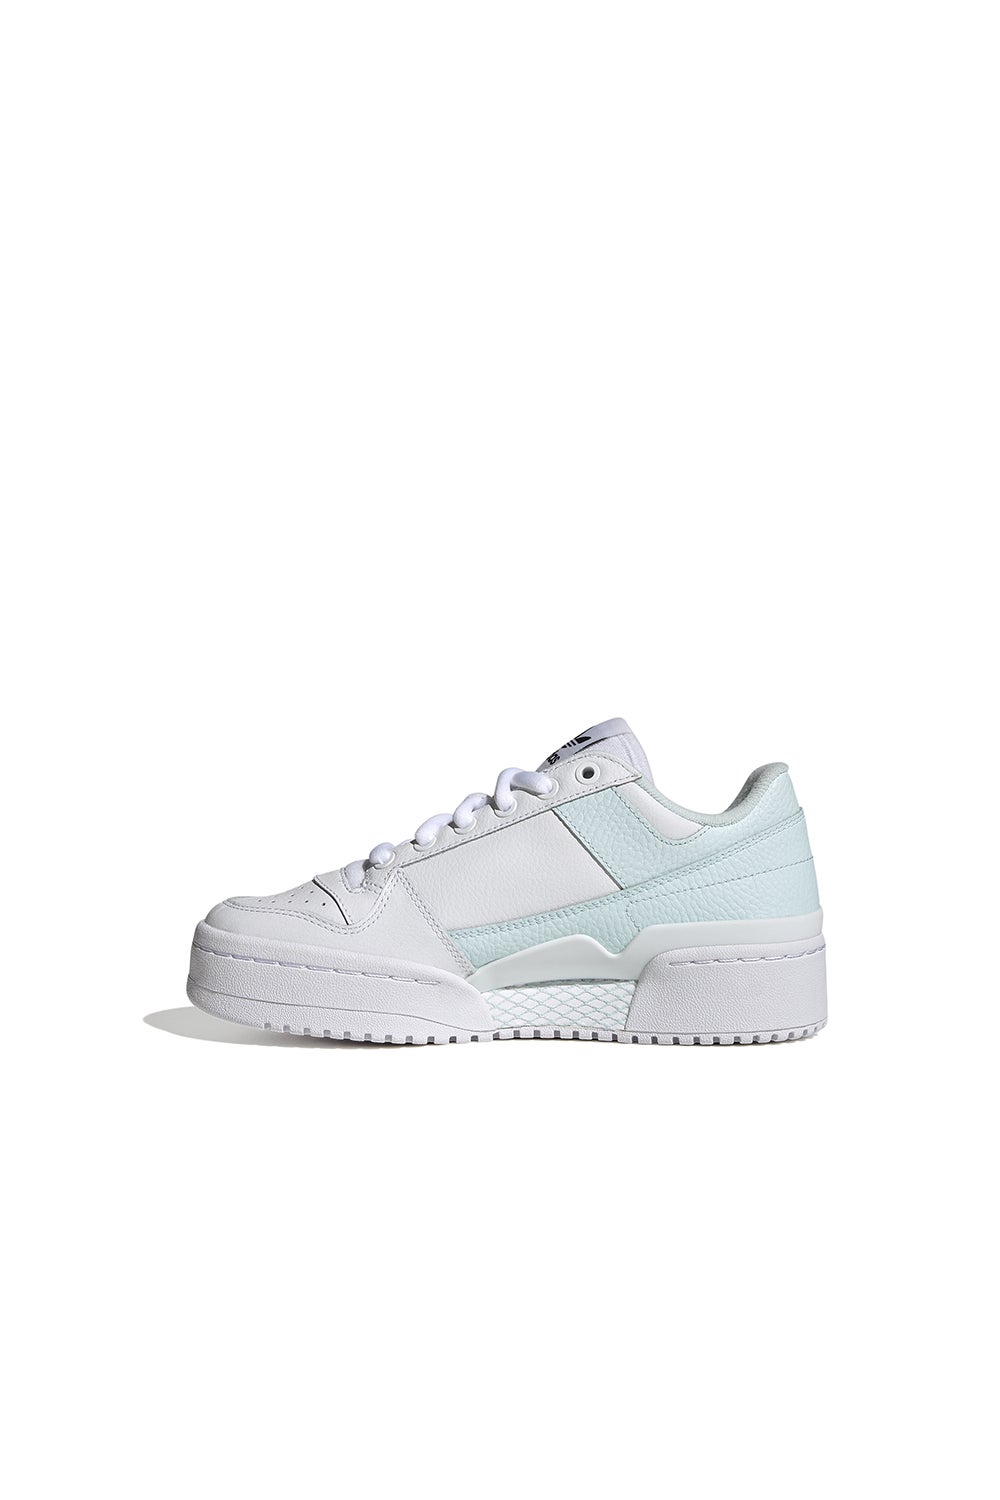 adidas Forum Bold W Shoes FTWR White/Almost Blue